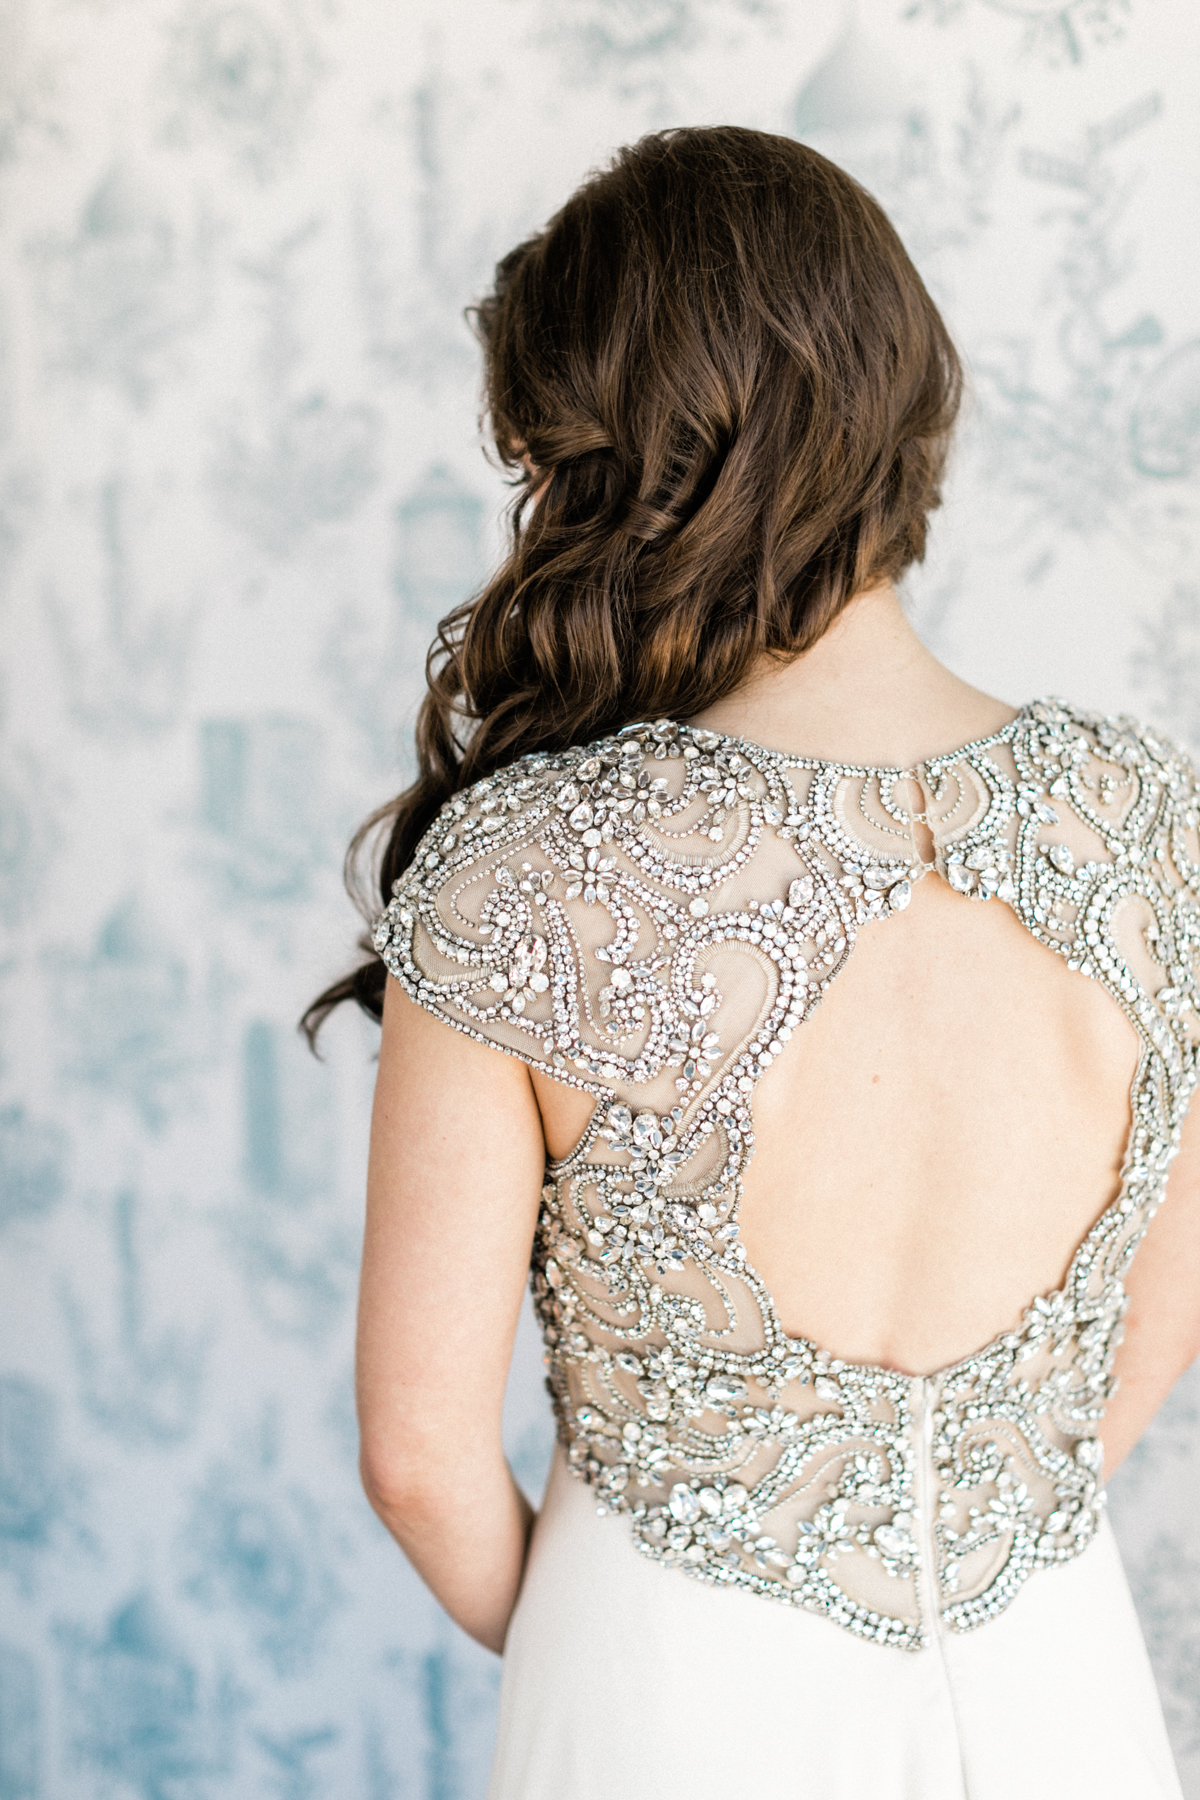 New York City wedding photographer | Bride in Jenny Packham gown | Wythe Hotel wedding | Wythe Hotel getting ready | Bride in beaded gown